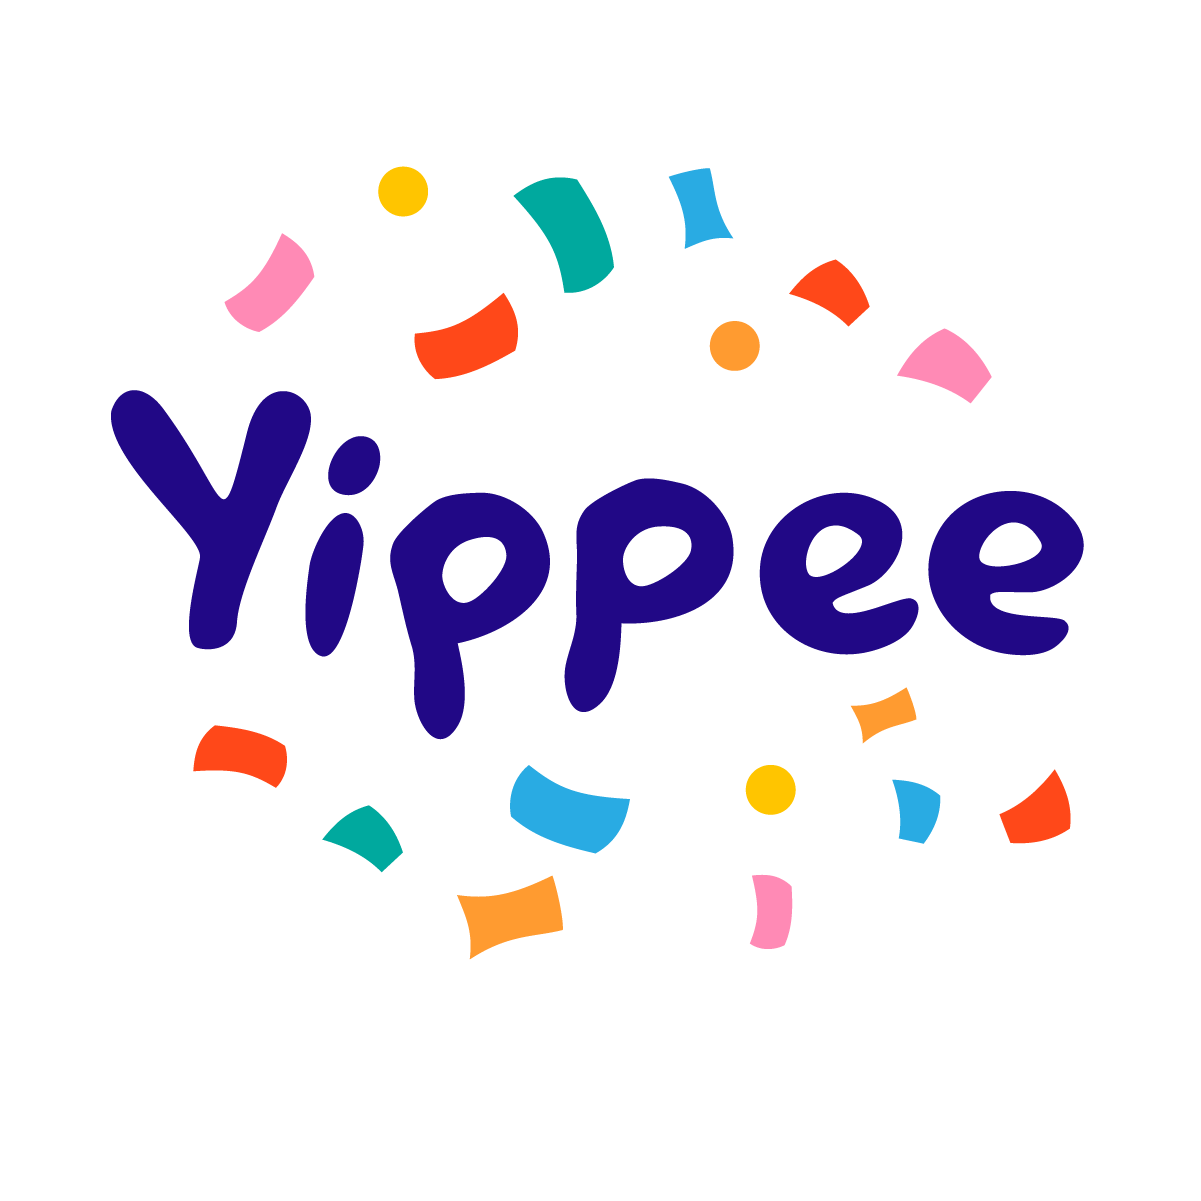 Picture of Yippee